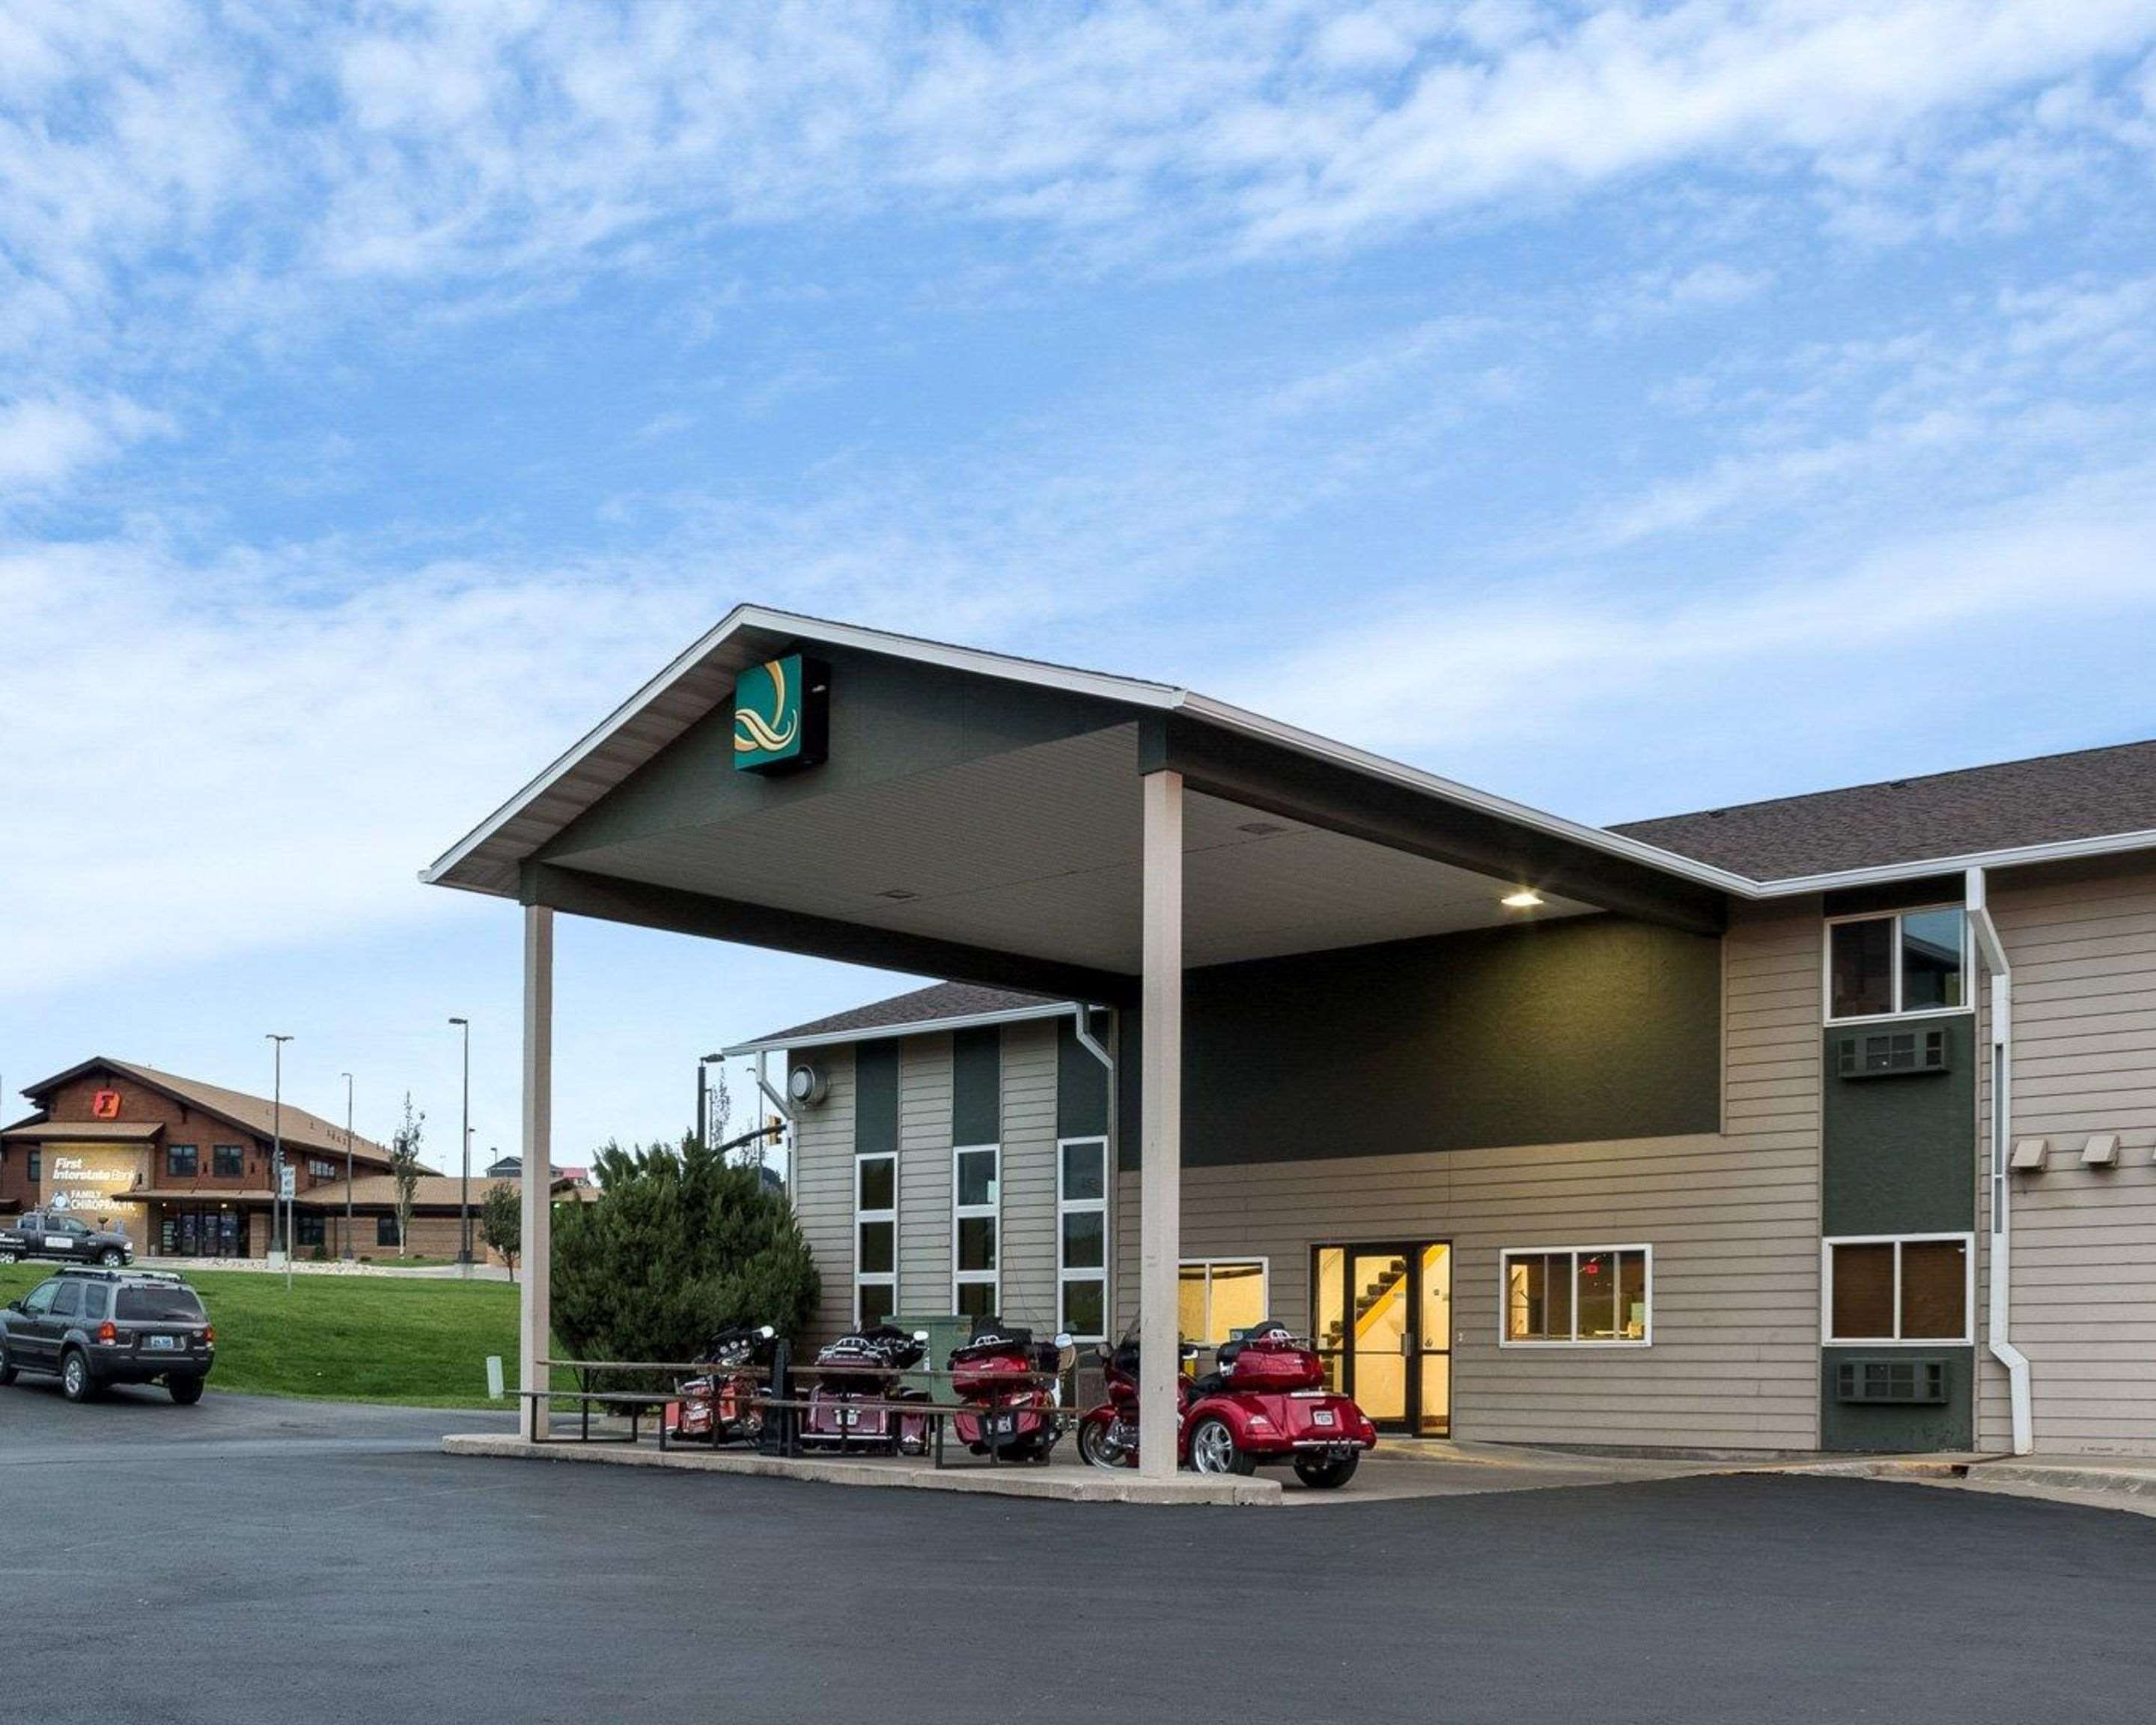 Quality Inn Coupons near me in Spearfish, SD 57783 8coupons